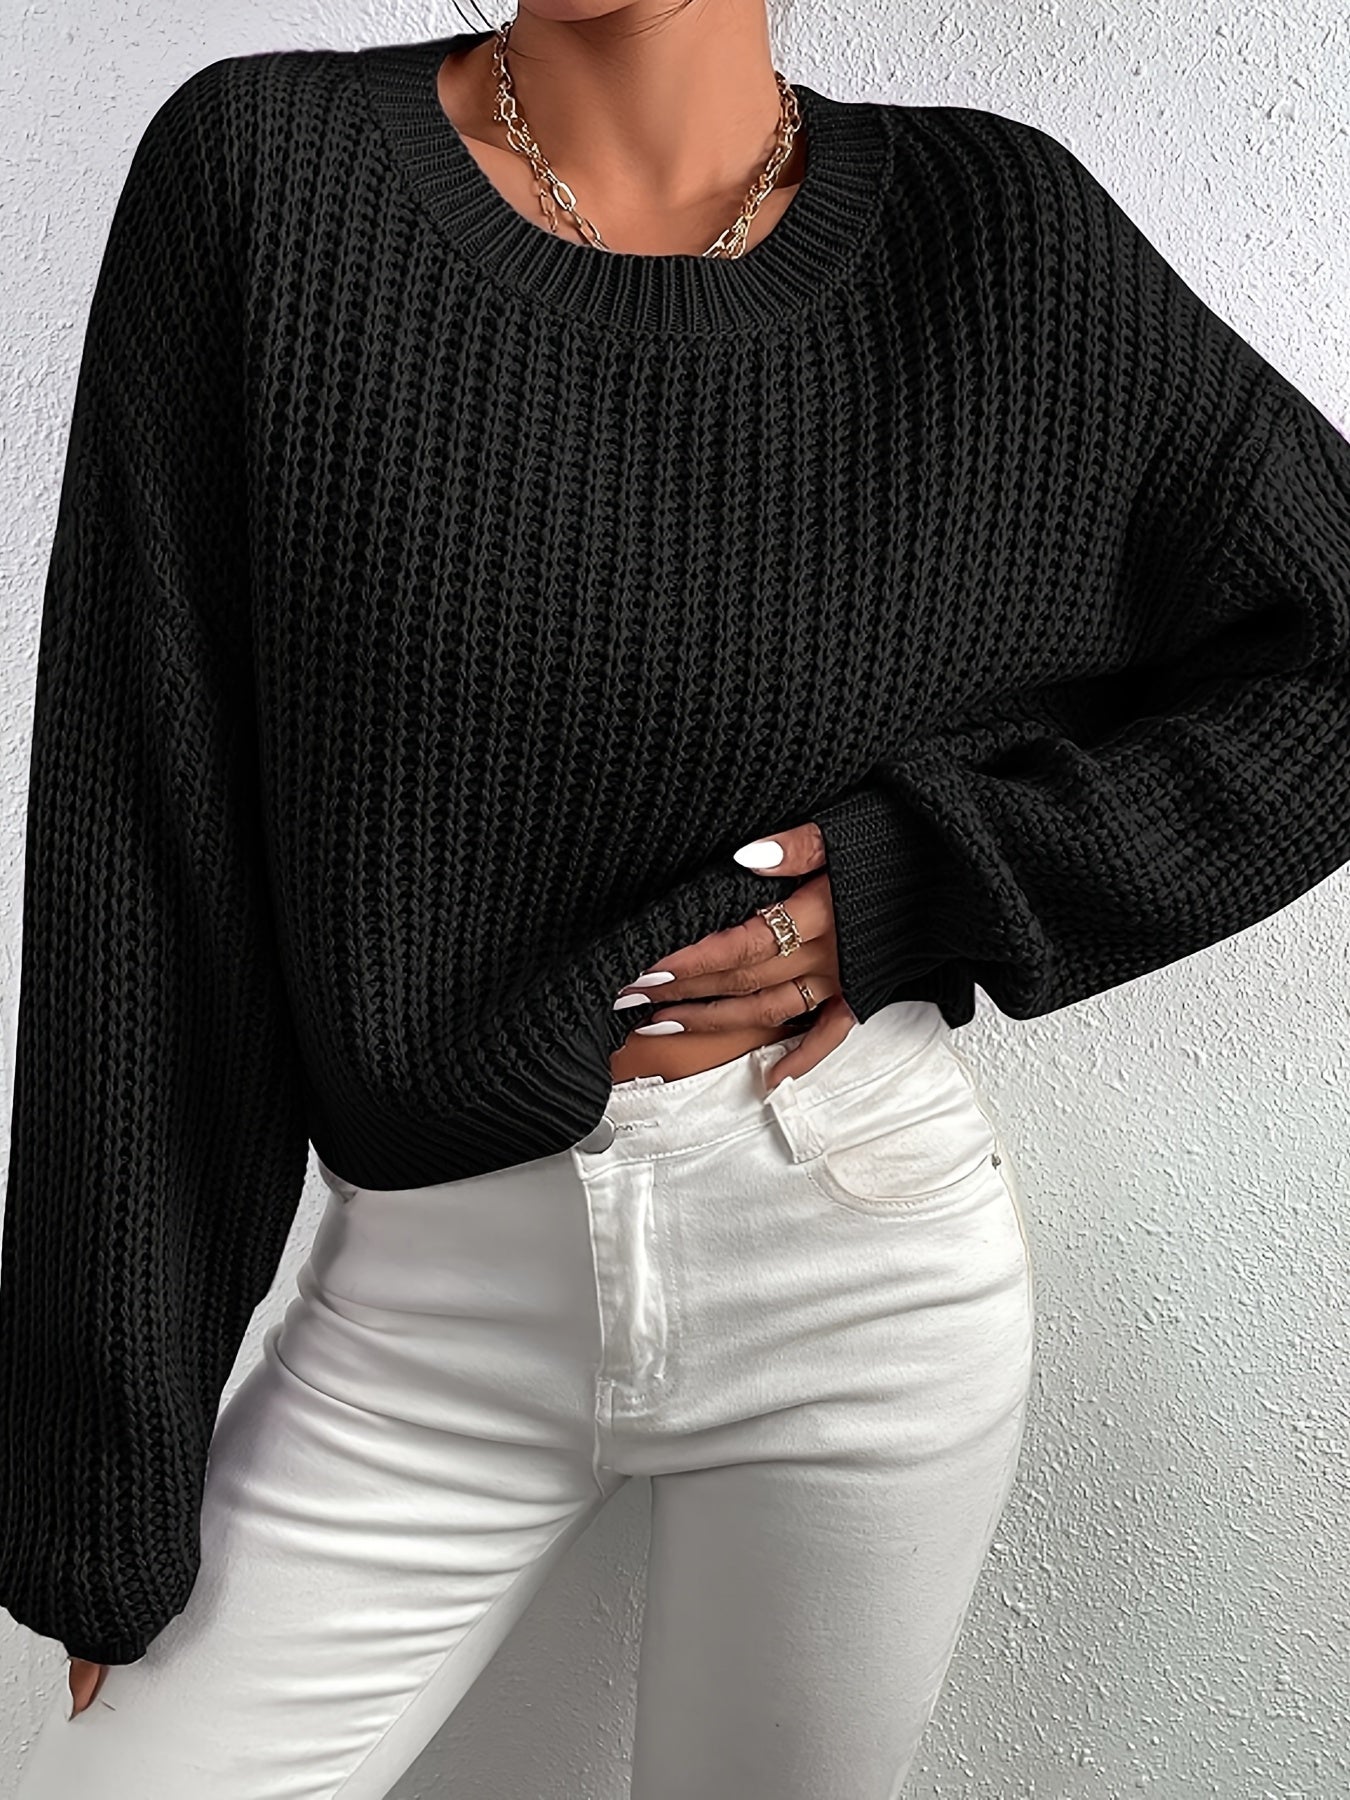 vlovelaw  Crew Neck Rib Knit Sweater, Casual Drop Shoulder Oversized Long Sleeve Loose Fall Winter Knit Sweater, Women's Clothing